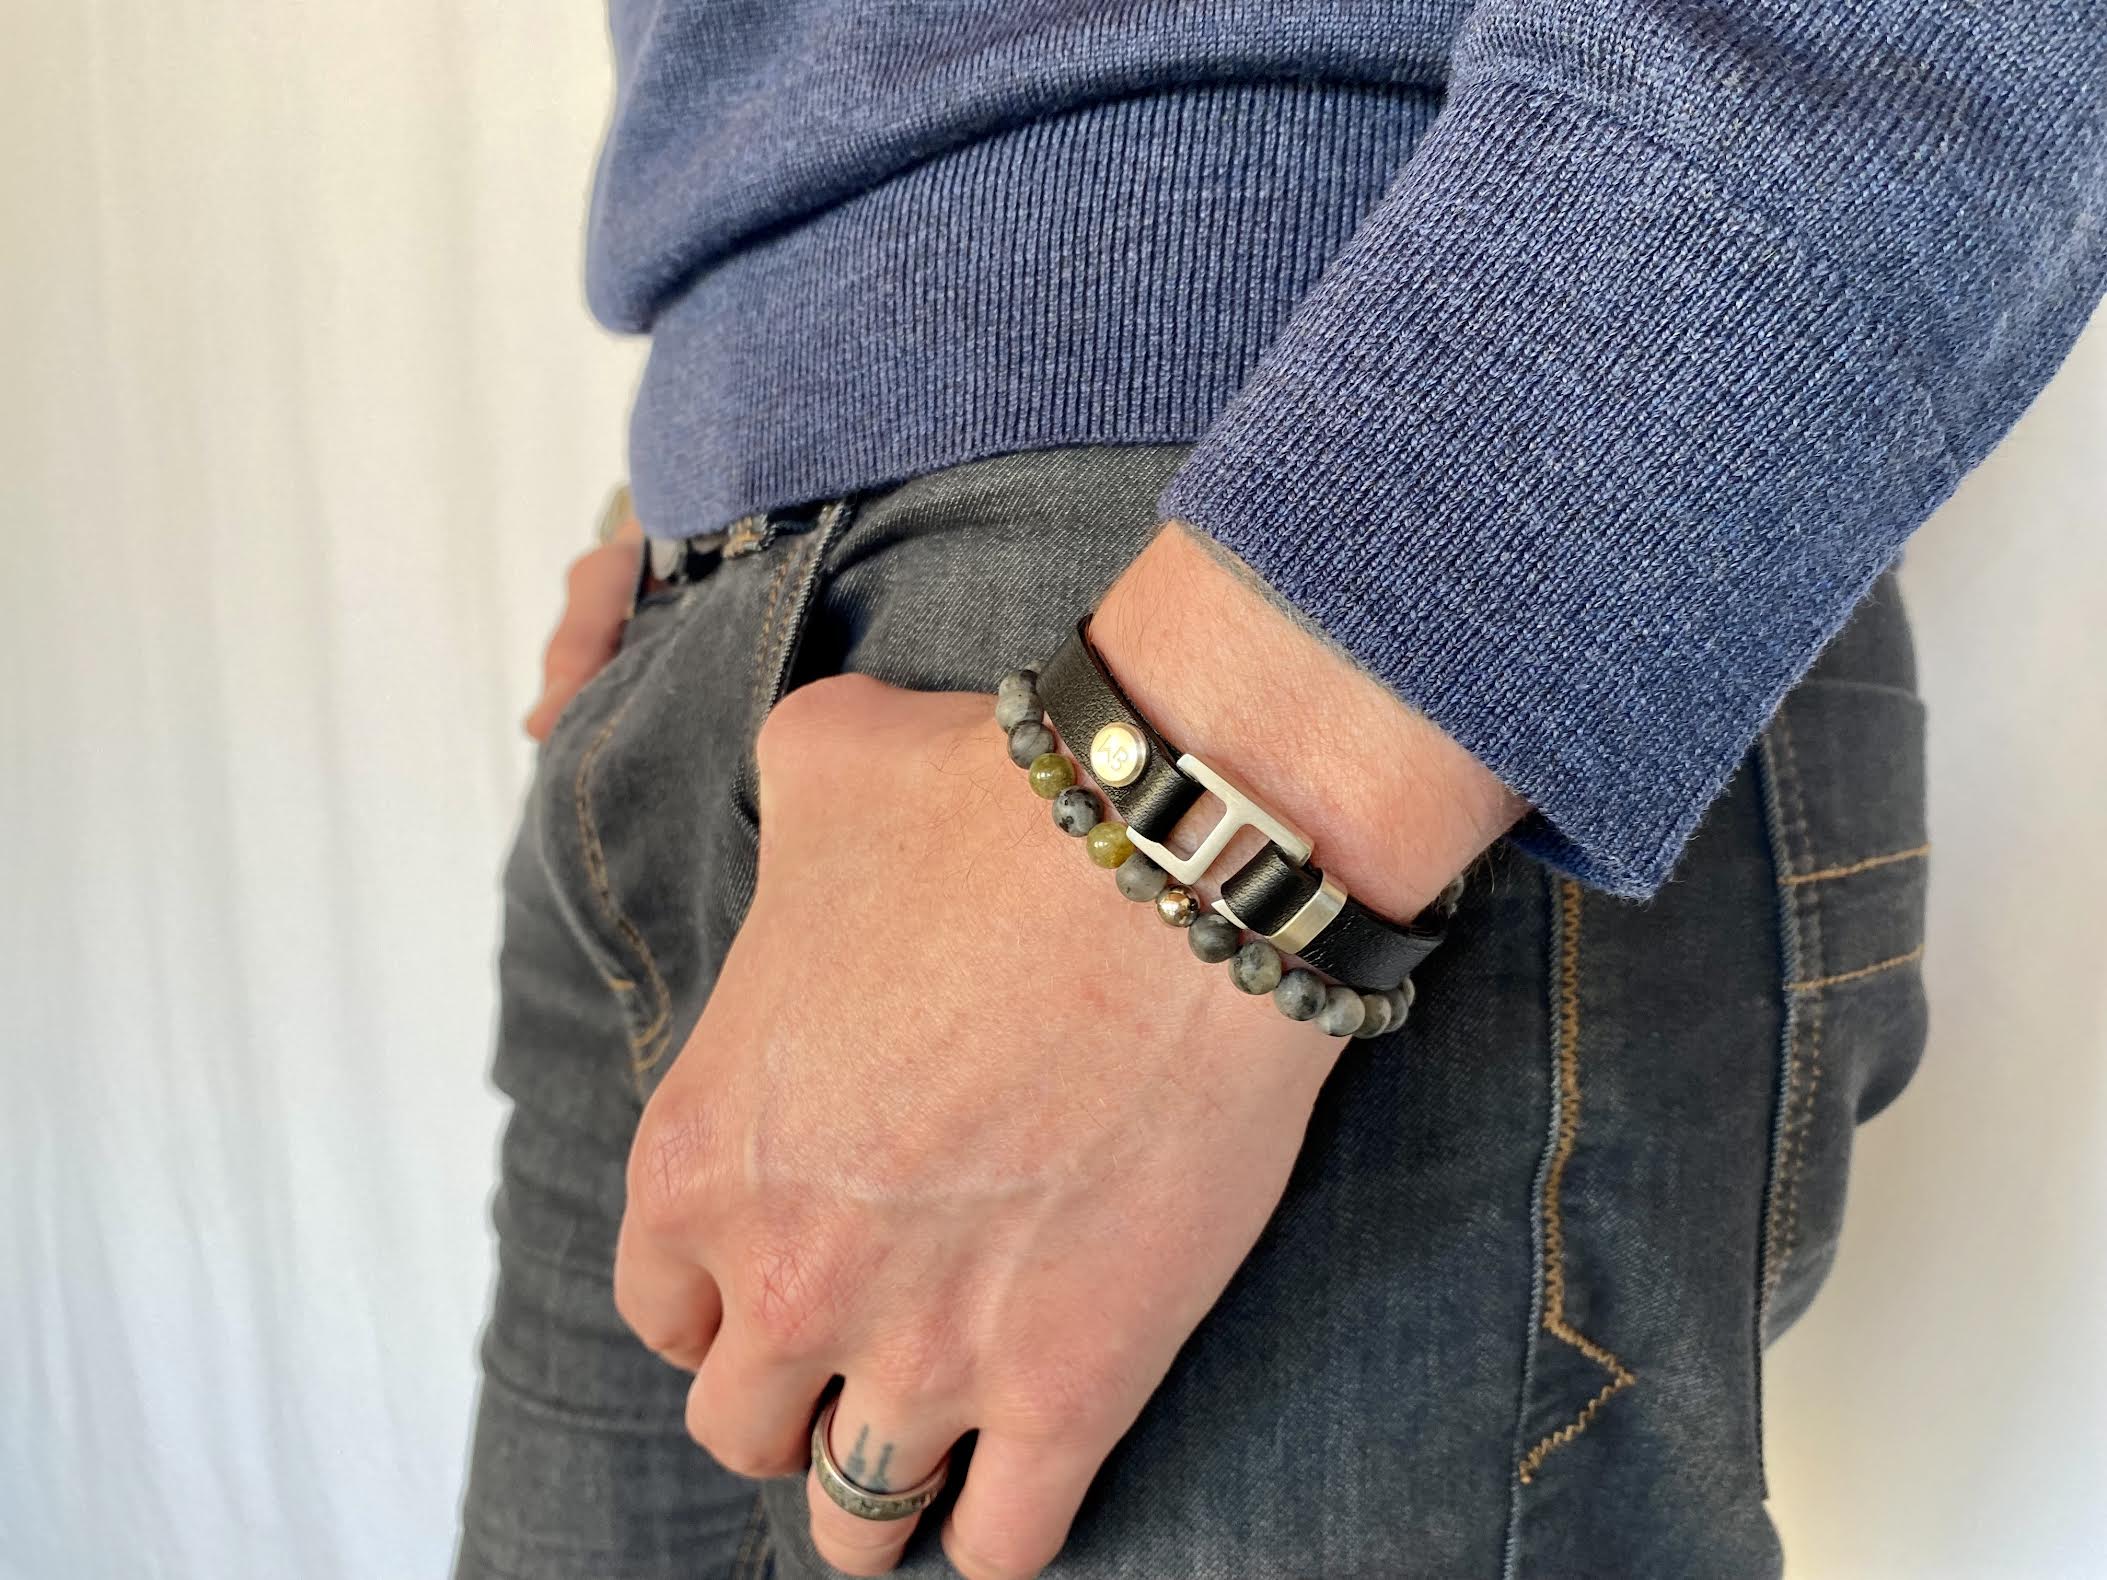 With a trendy, cool modern vibe, this black Italian leather cuff bracelet is paired with your choice of brushed stainless steel, brass or black ceramic hardware. Our signature cuff bracelet is a modern staple for your WristBend collection. Made by WristBend